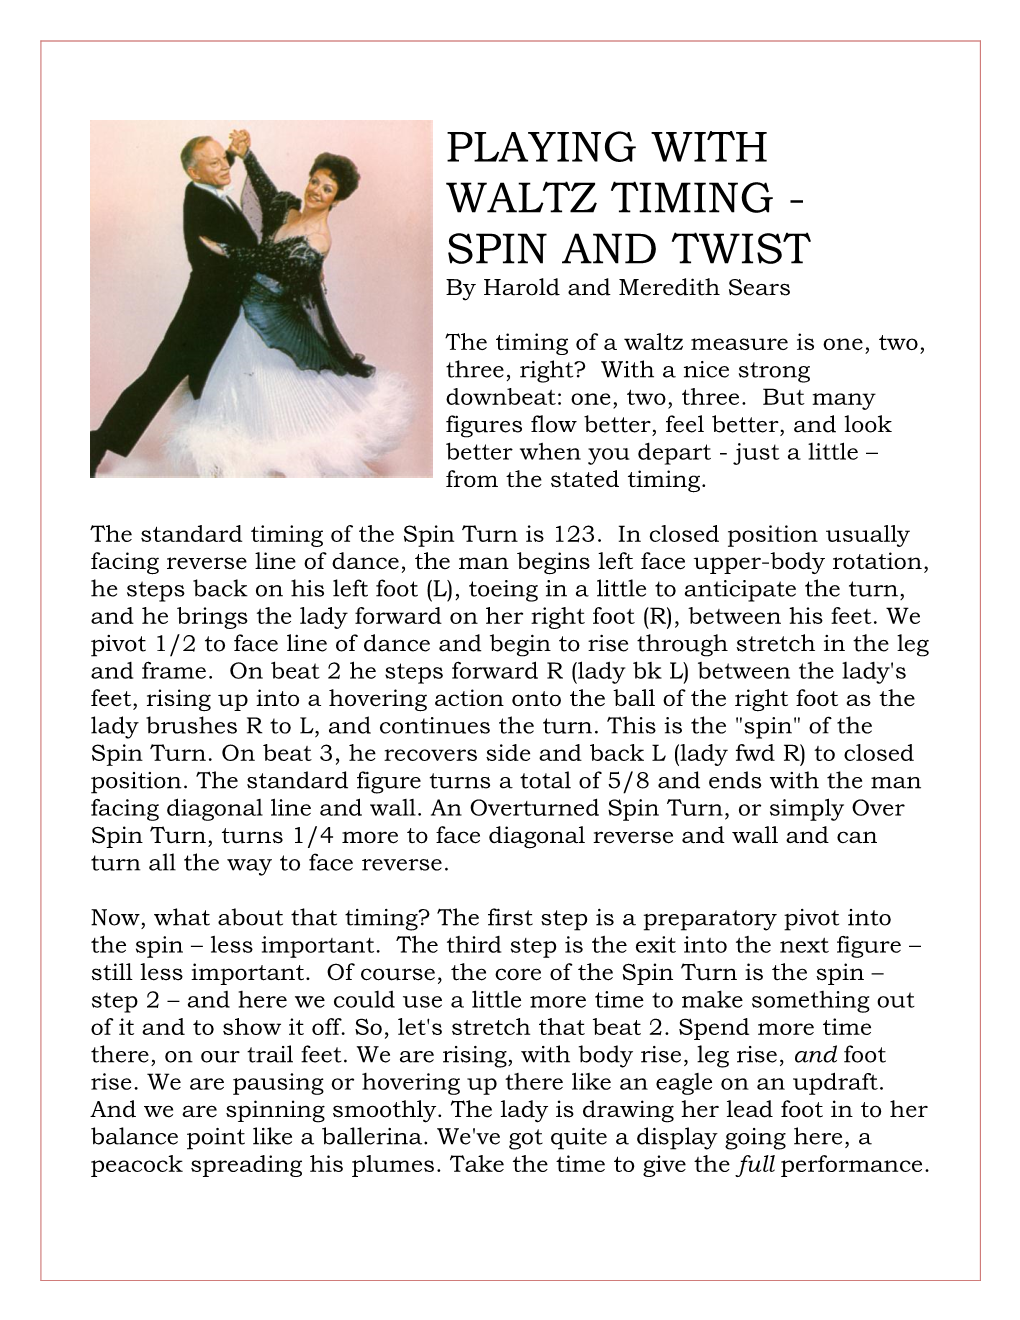 PLAYING with WALTZ TIMING - SPIN and TWIST by Harold and Meredith Sears